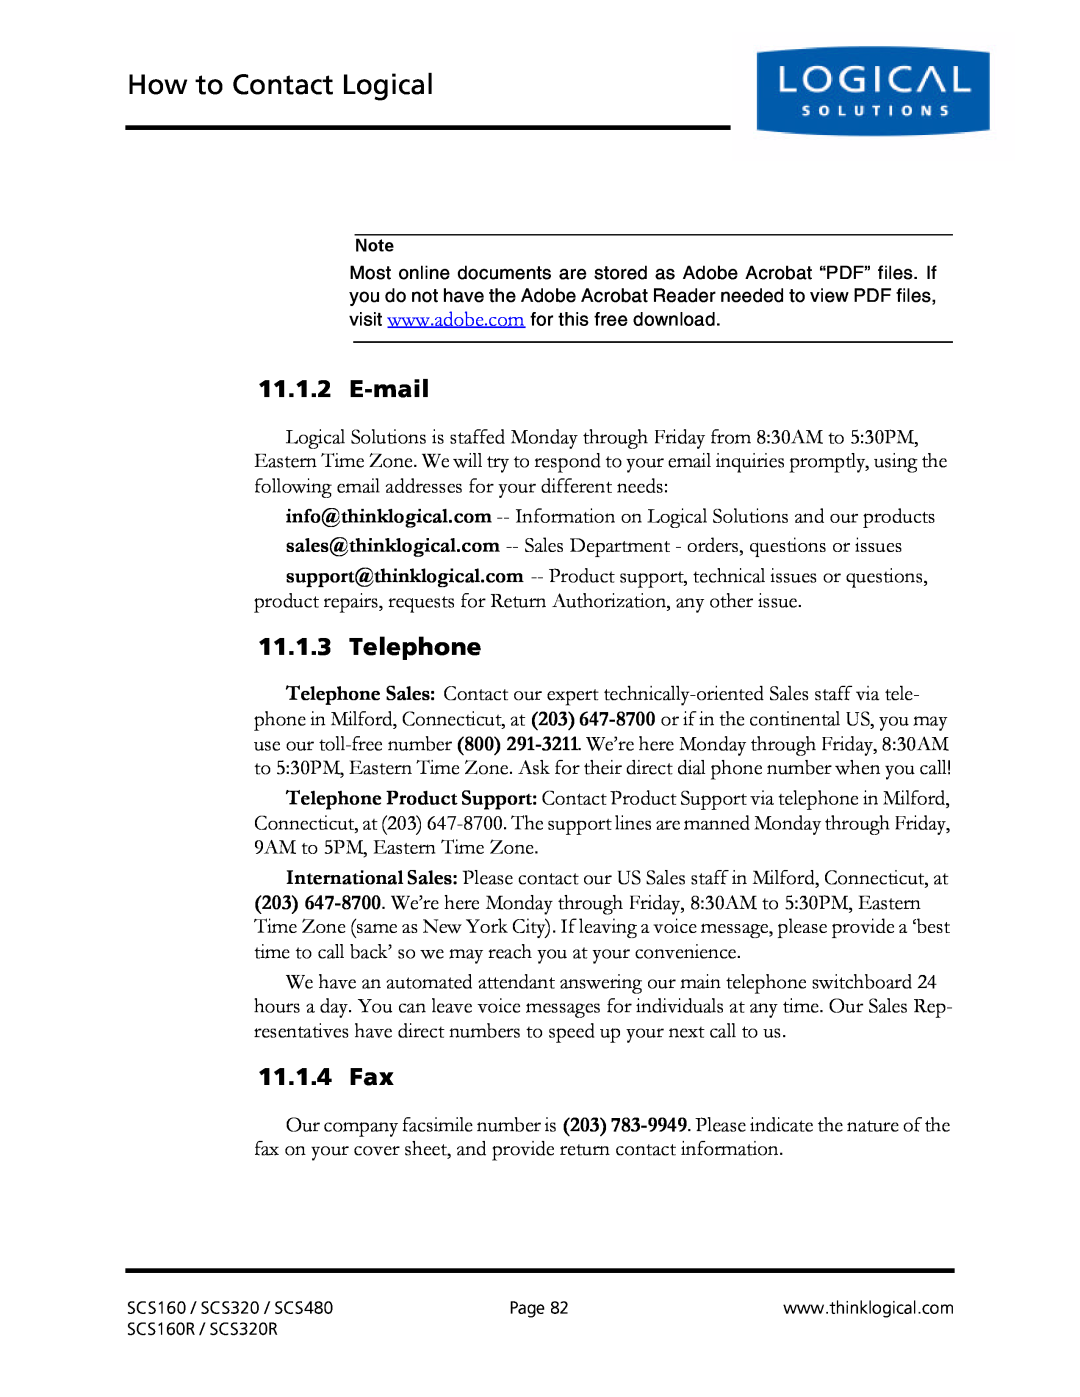 Logical Solutions SCS-R manual How to Contact Logical, E-mail, Telephone, 11.1.4 Fax 